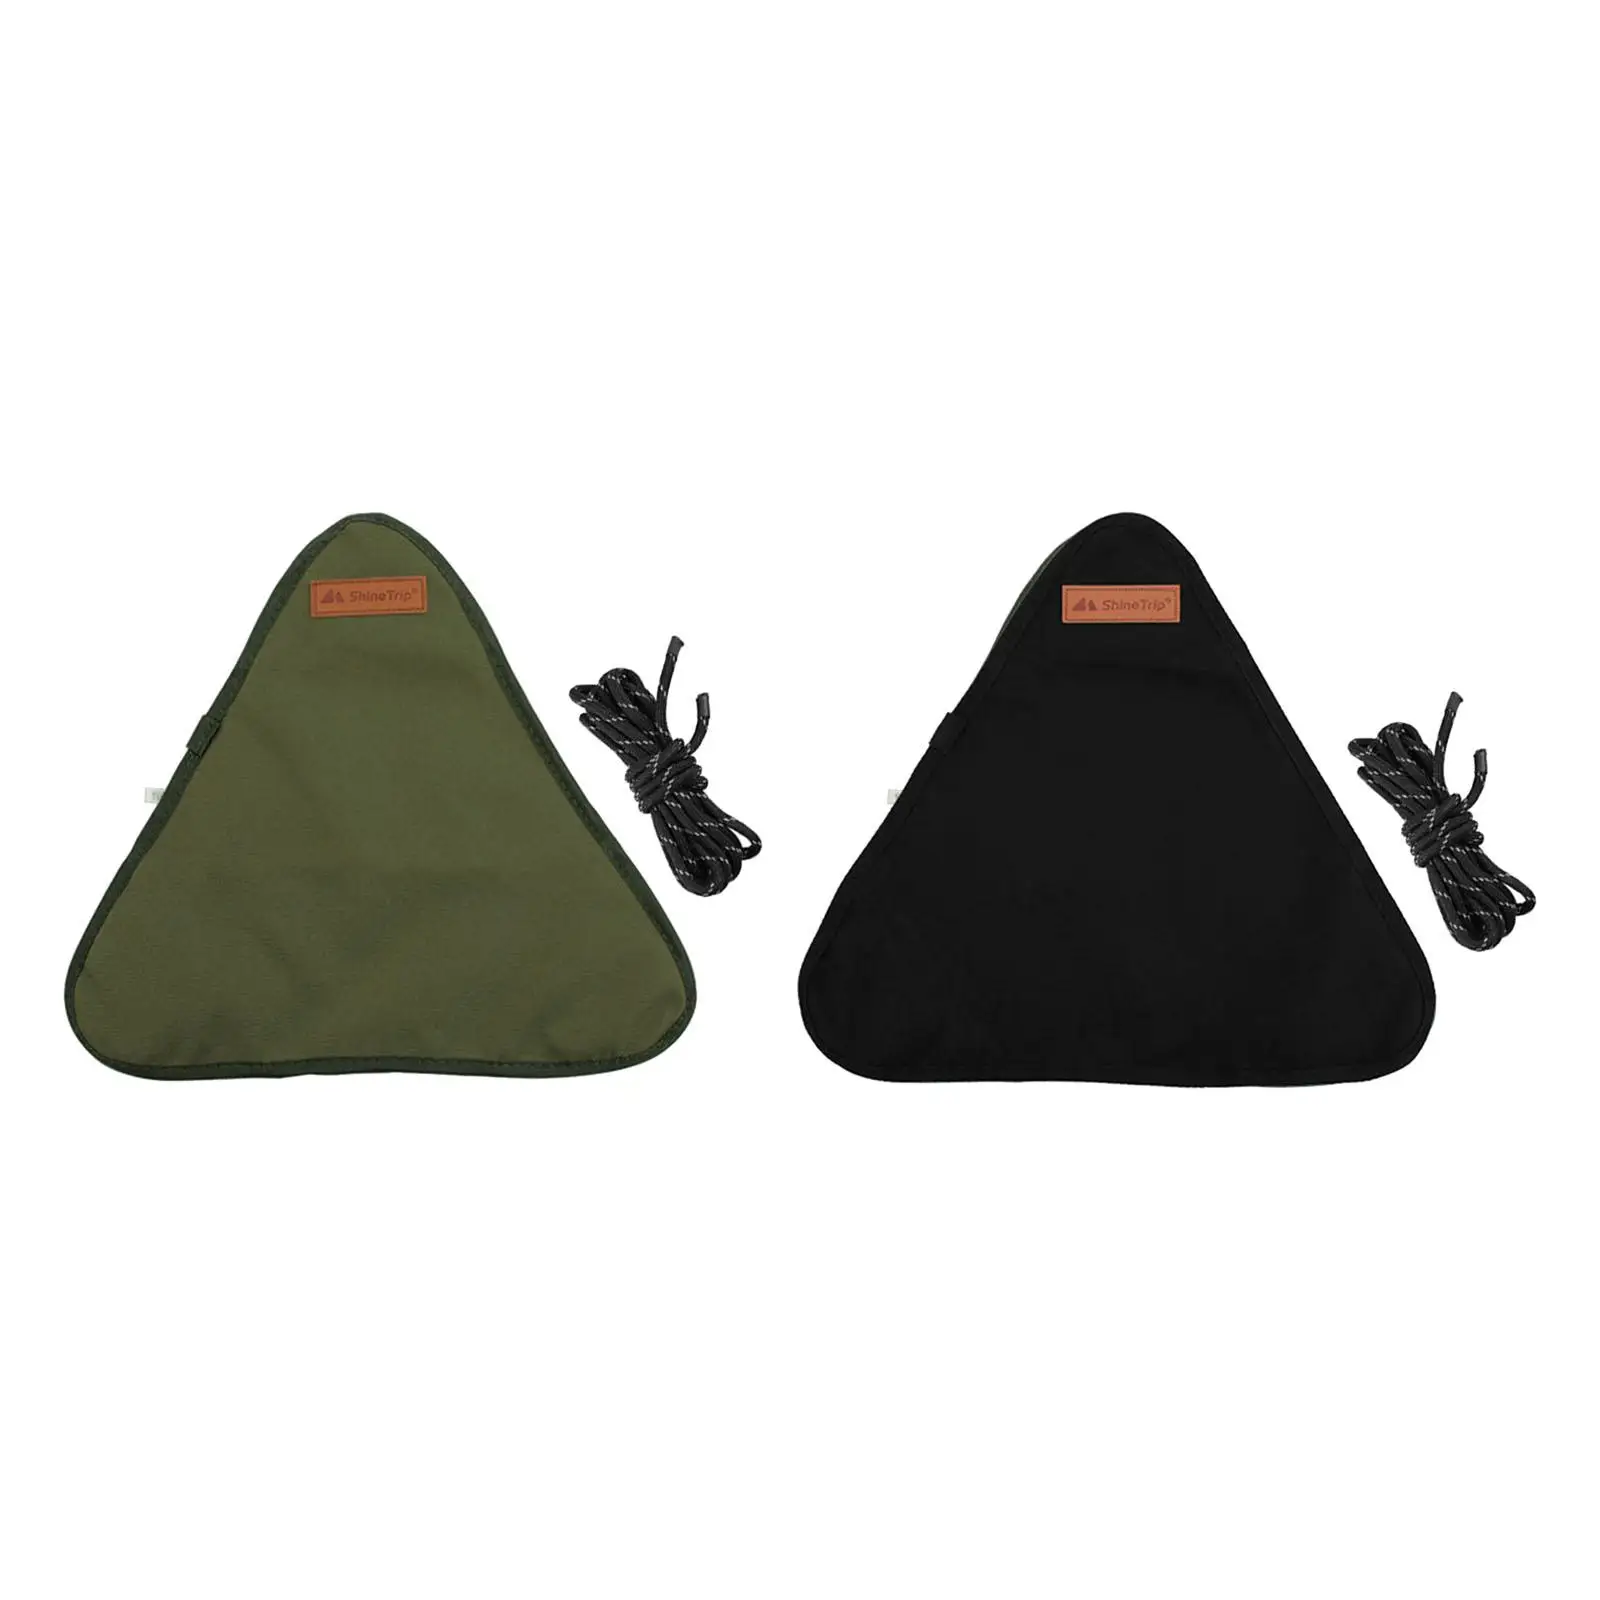 Foldable Tripod Stool Cloth, Slacker Oxford Cloth Waterproof   Seat Cover, for Outdoor, Camping, Beach, Picnic Accessories